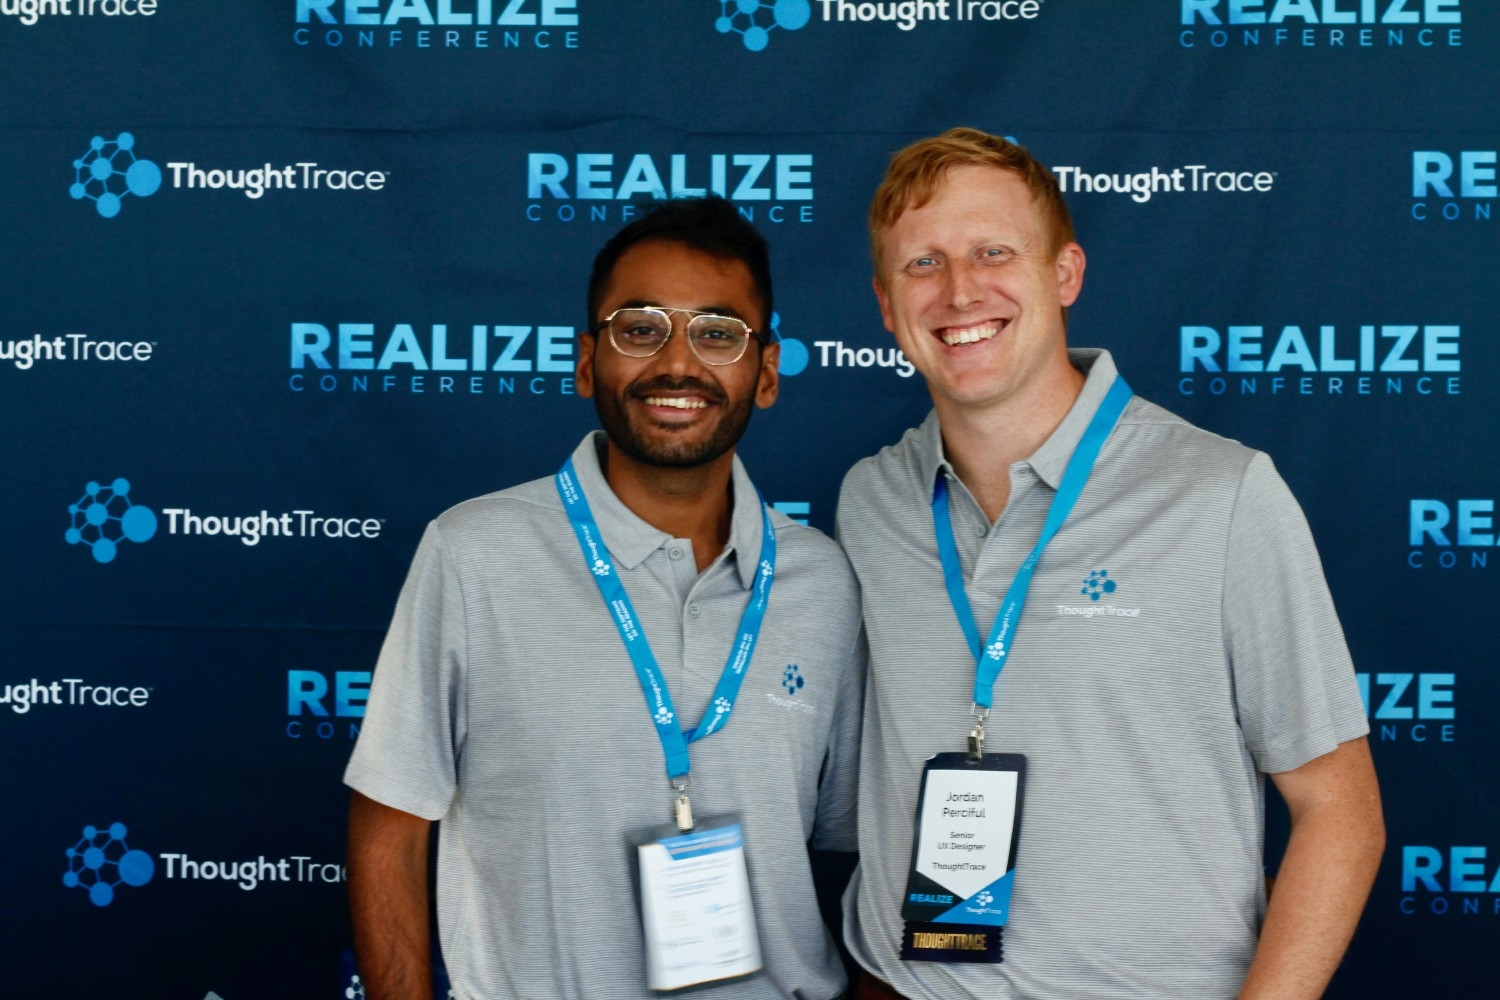 Members of our development team at our annual REALIZE Conference in-between the impressive product showcase sessions!